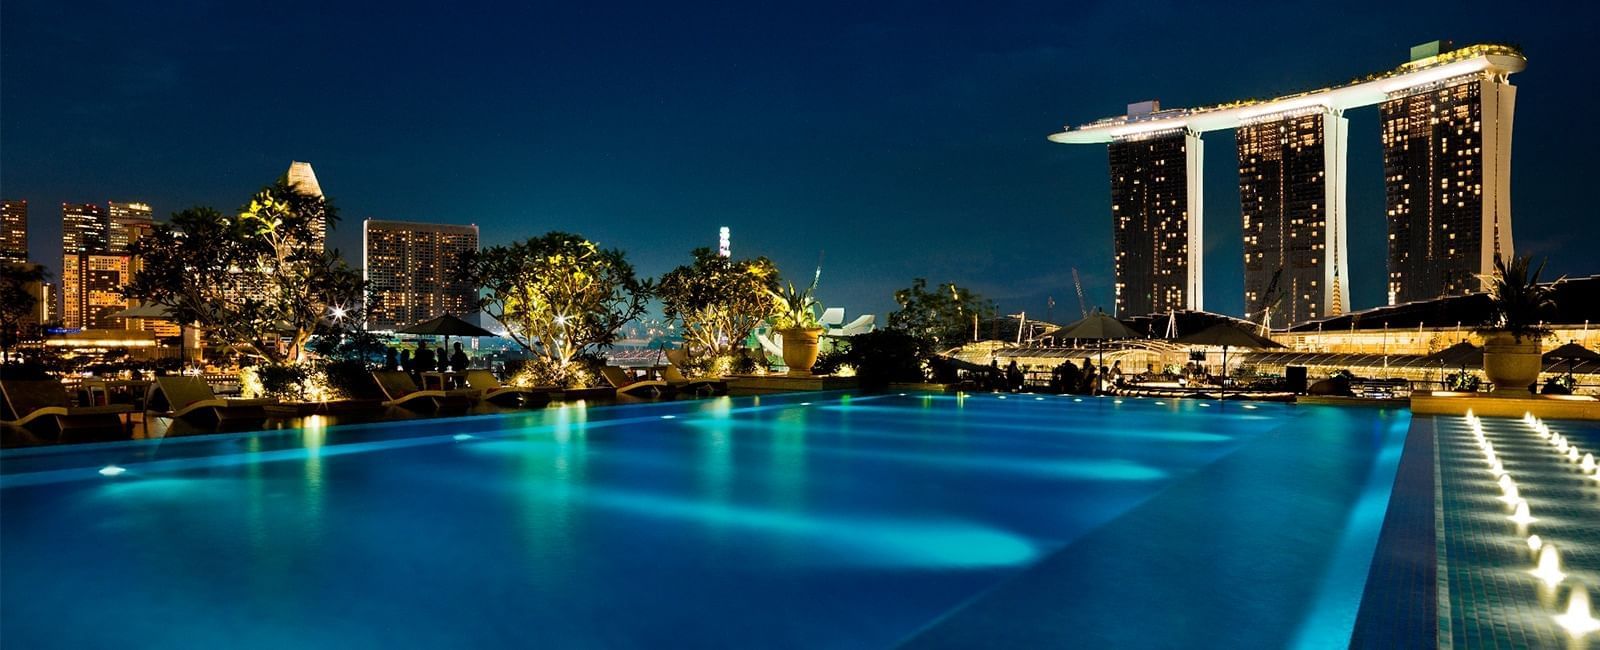 Close up on the pool with city views at Fullerton Bay Singapore